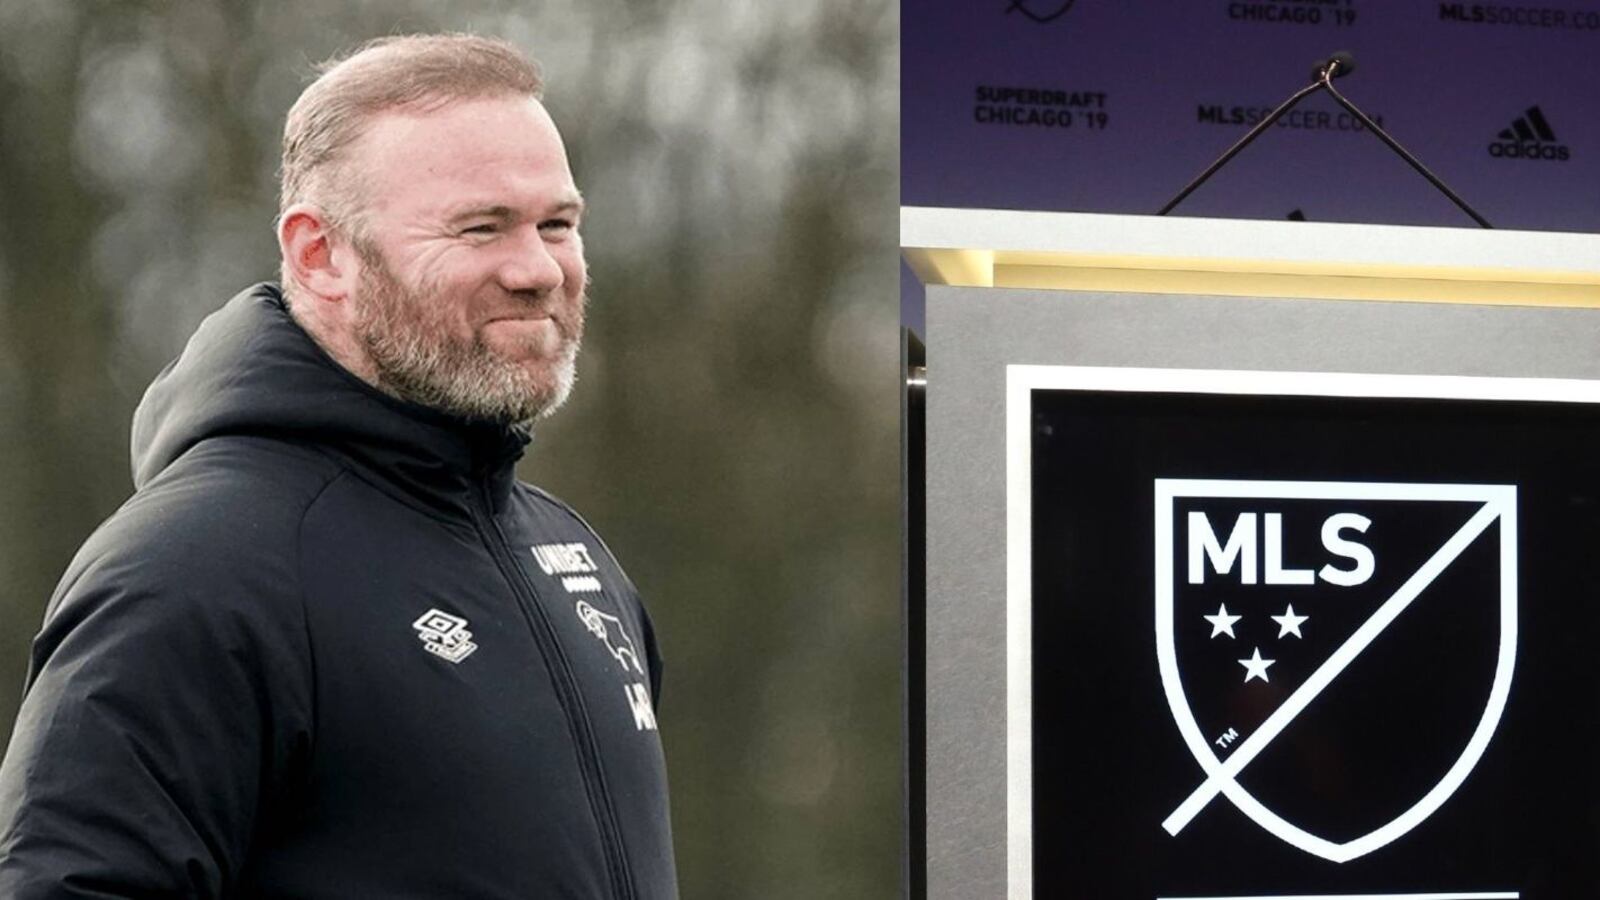 Wayne Rooney receives a strong betrayal on his return to MLS